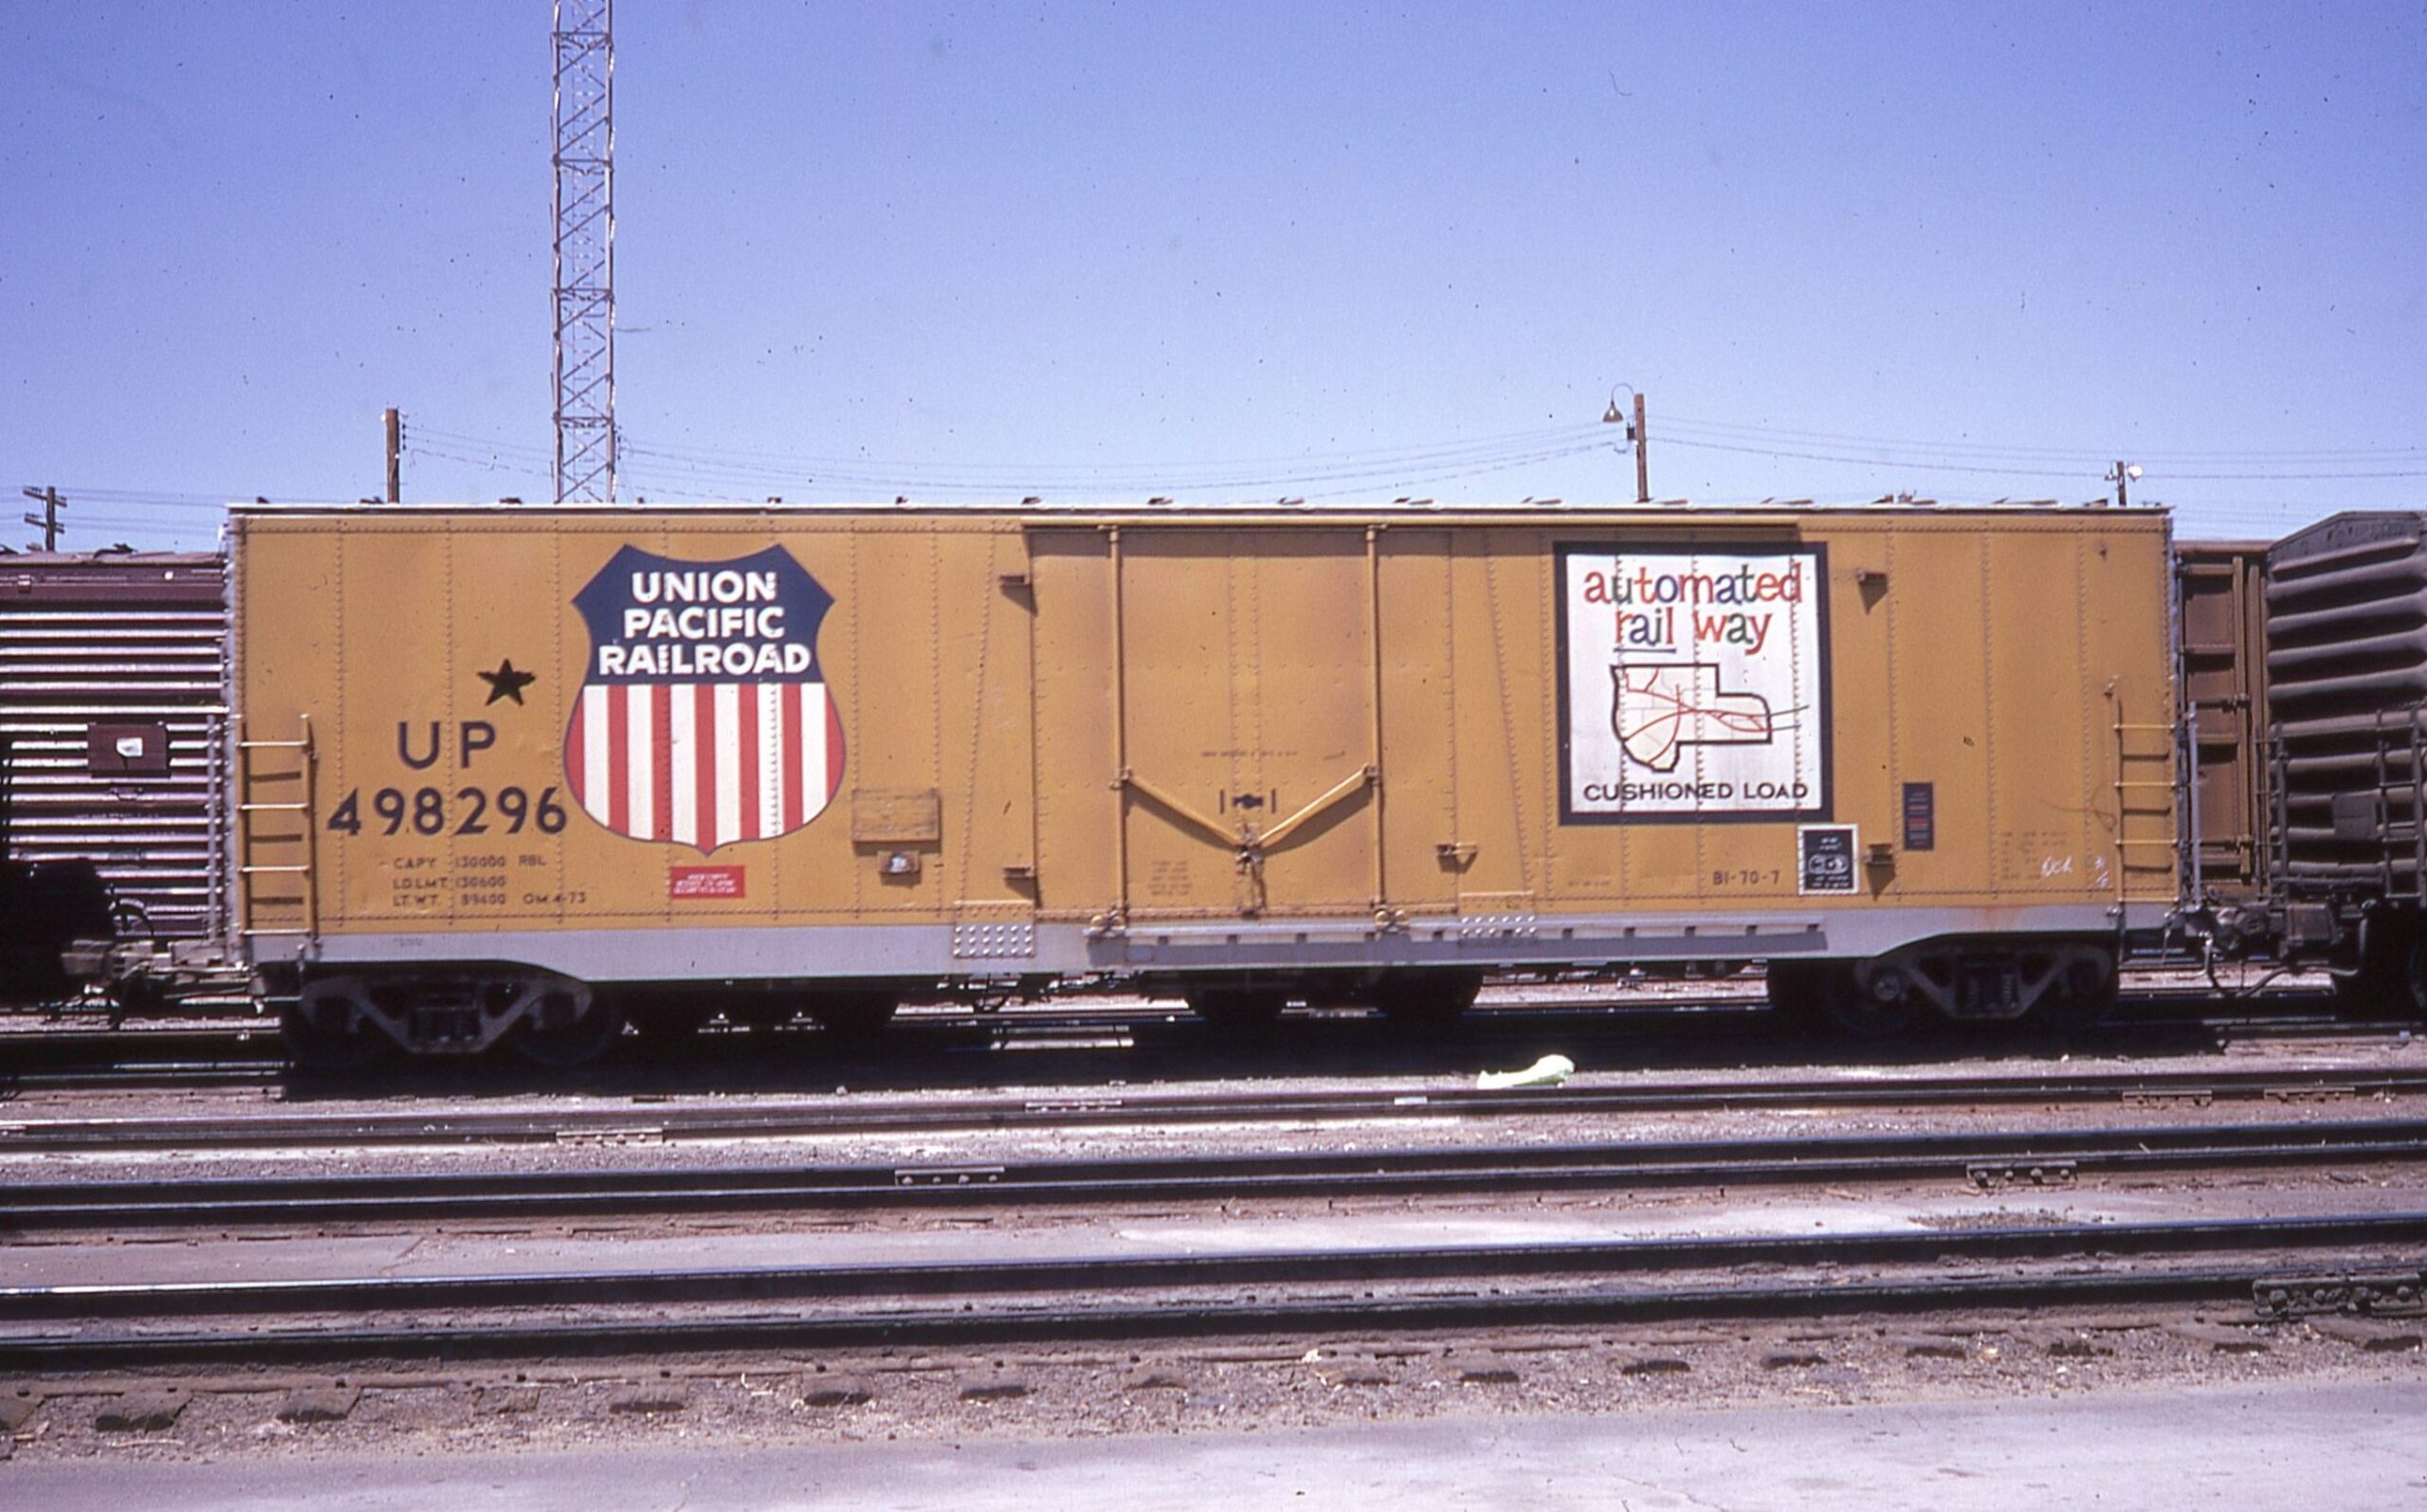 Union Pacific | Las Vegas, Nevada | Plug door box car #UP498296 Automated Railway | May 3, 1974 | Stev Timko Collection